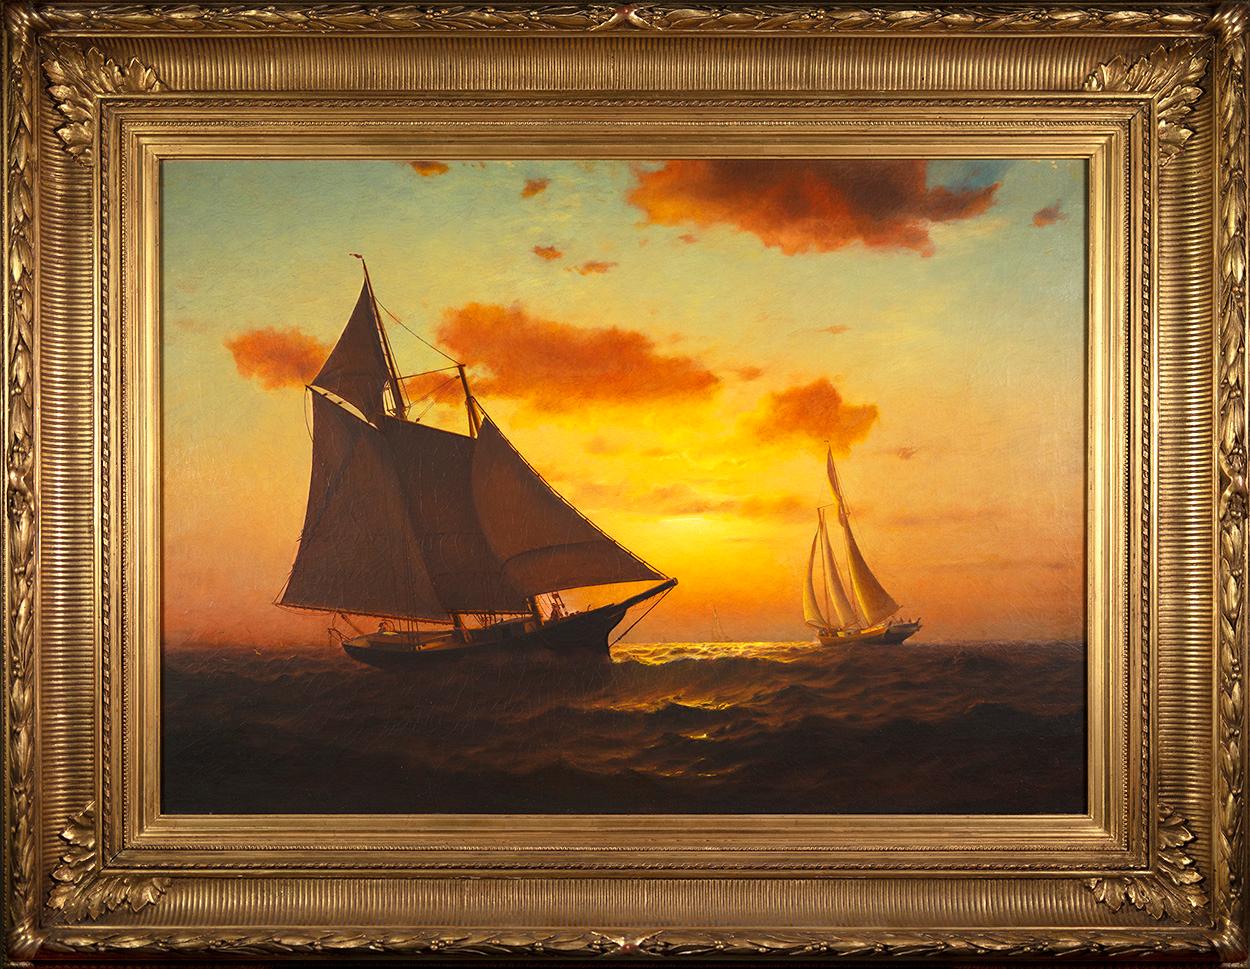 Sail Boats at Sunset  - Painting by Warren Sheppard